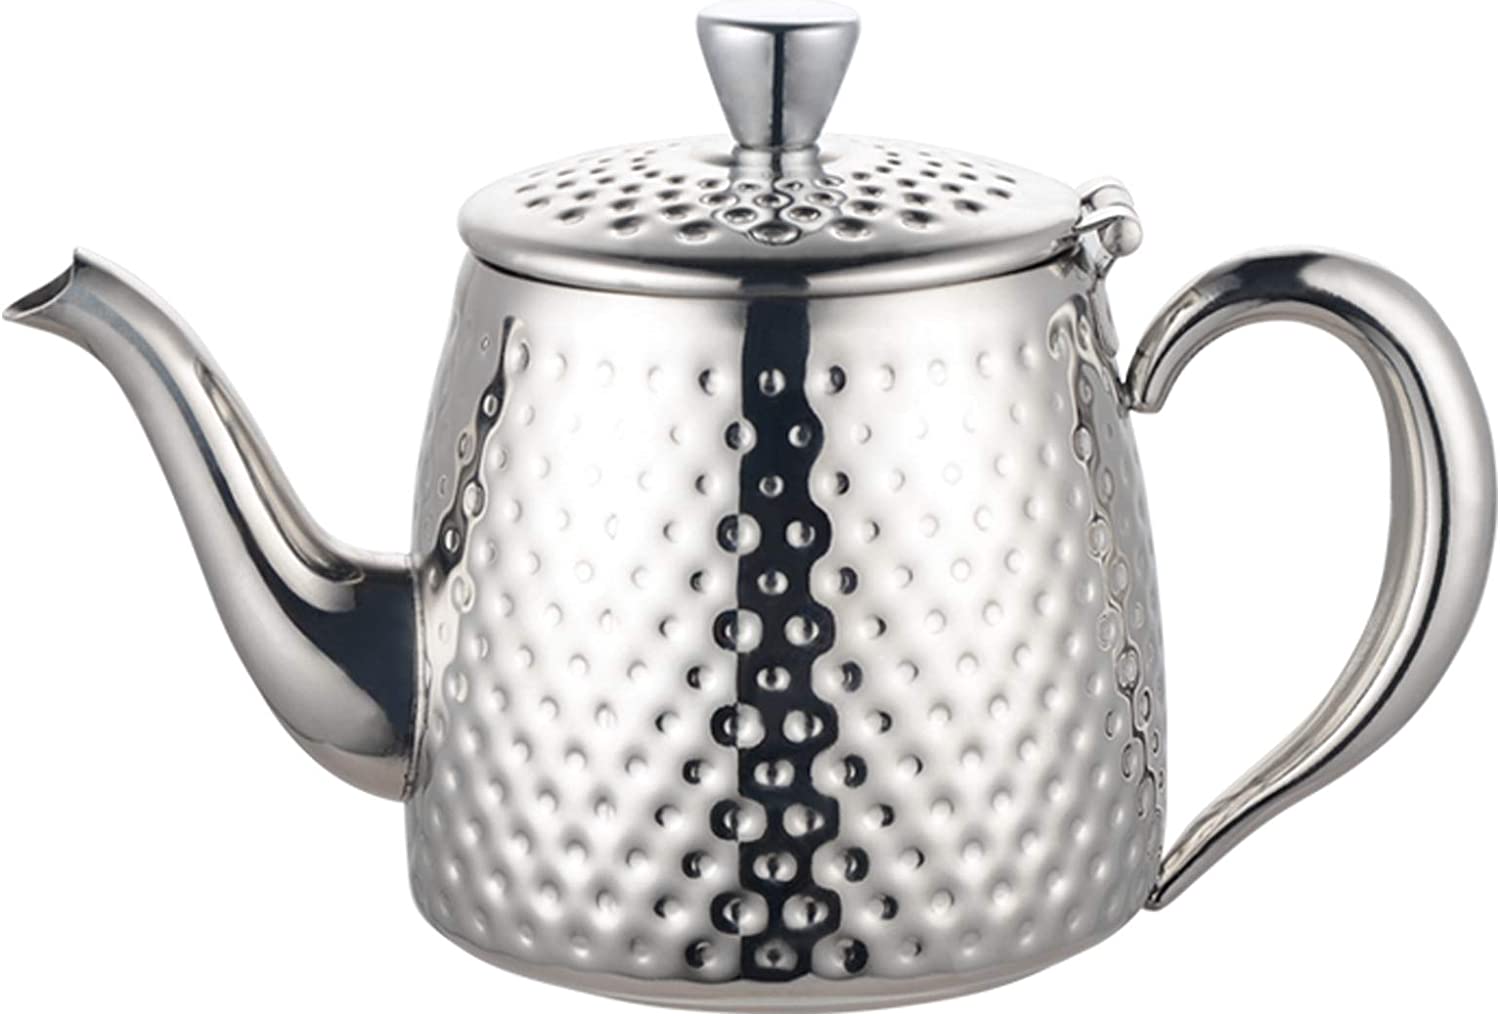 Cafe Ole Café Olé Sandringham Hammered Effect Teapot Made From High Quality 18/10 Stainless Steel - High Polish 18oz 0.5L Non Drip Cast Hollow Handles